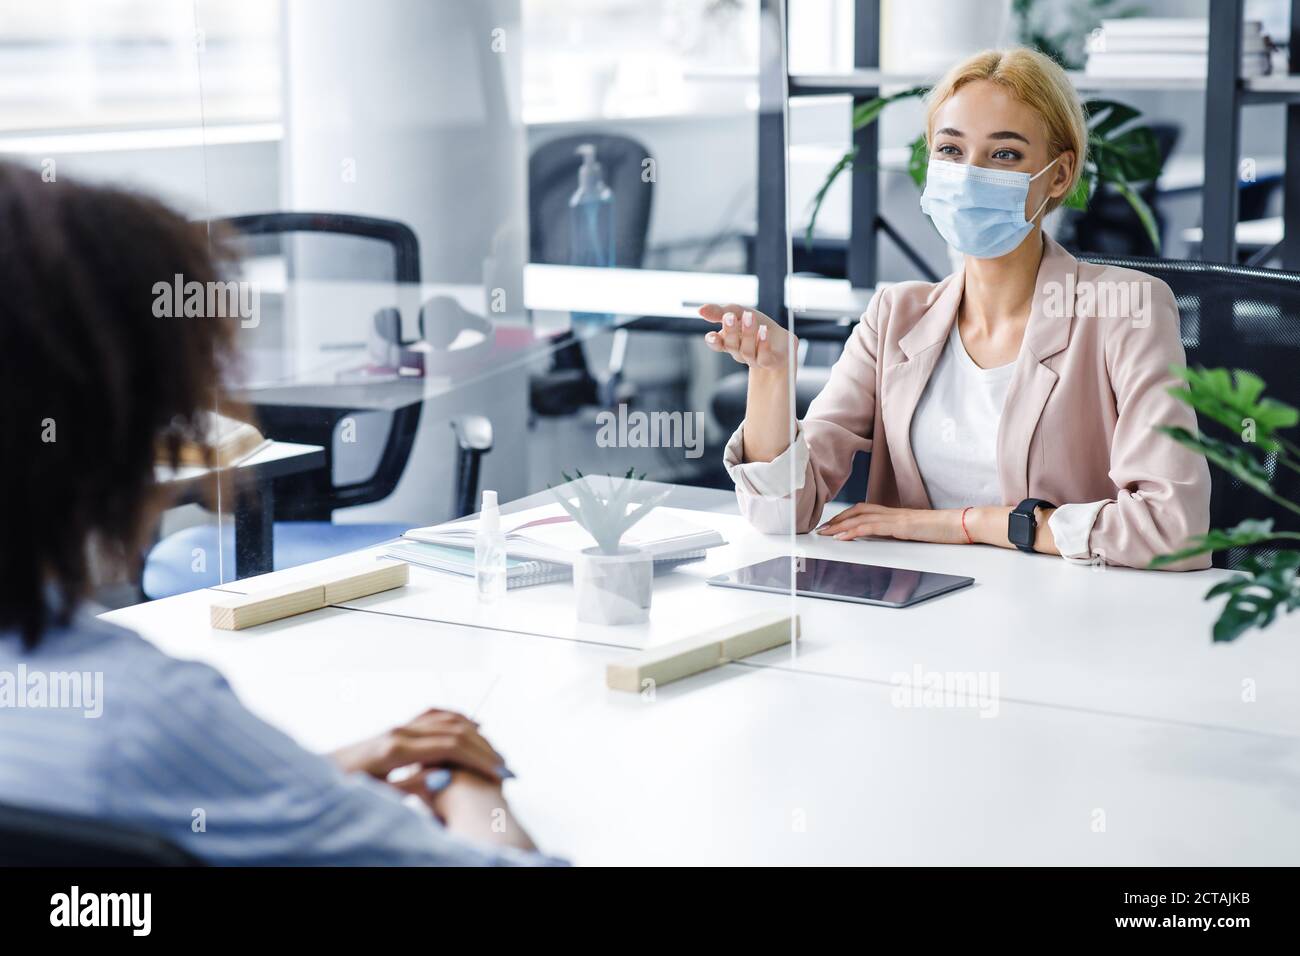 African american lady speaks to business woman in protective mask through glass partition in office interior Stock Photo